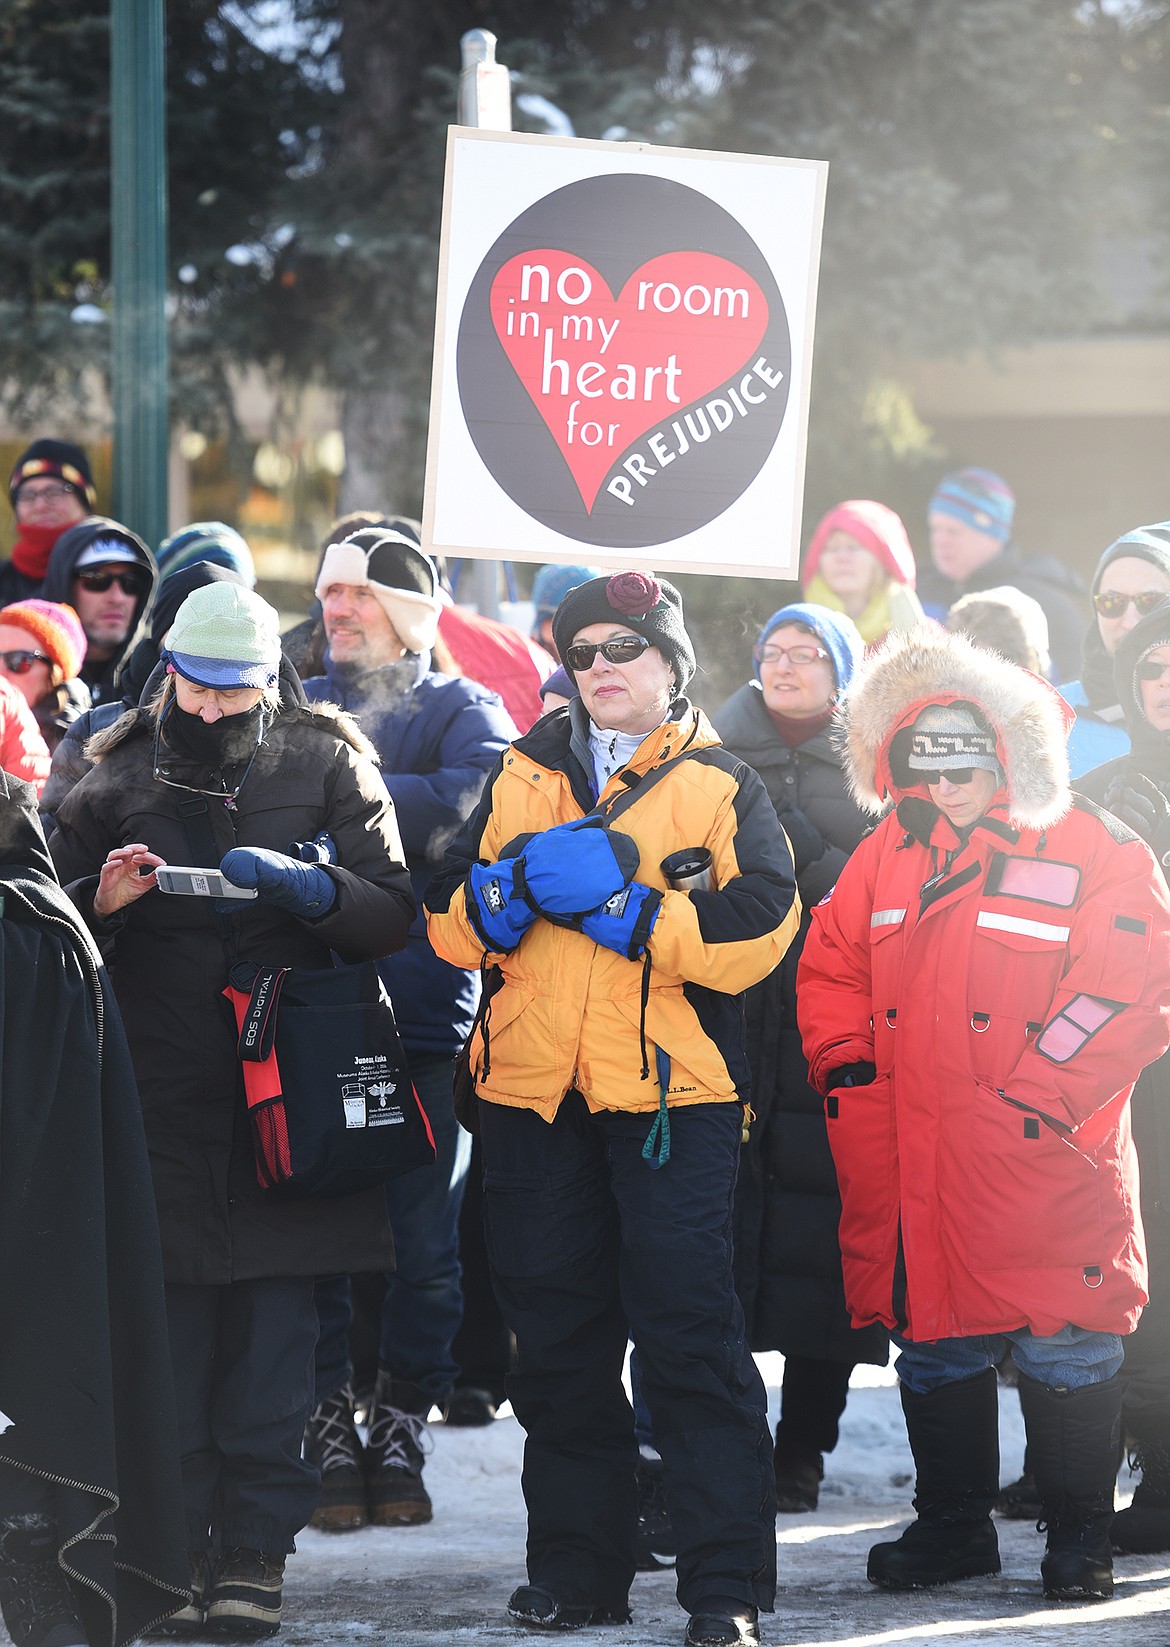 A CROWD of hundreds gathered in downtown Whitefish for the Love Not Hate event at Depot Park on Saturday, Jan. 7. (Brenda Ahearn/Daily Inter Lake)